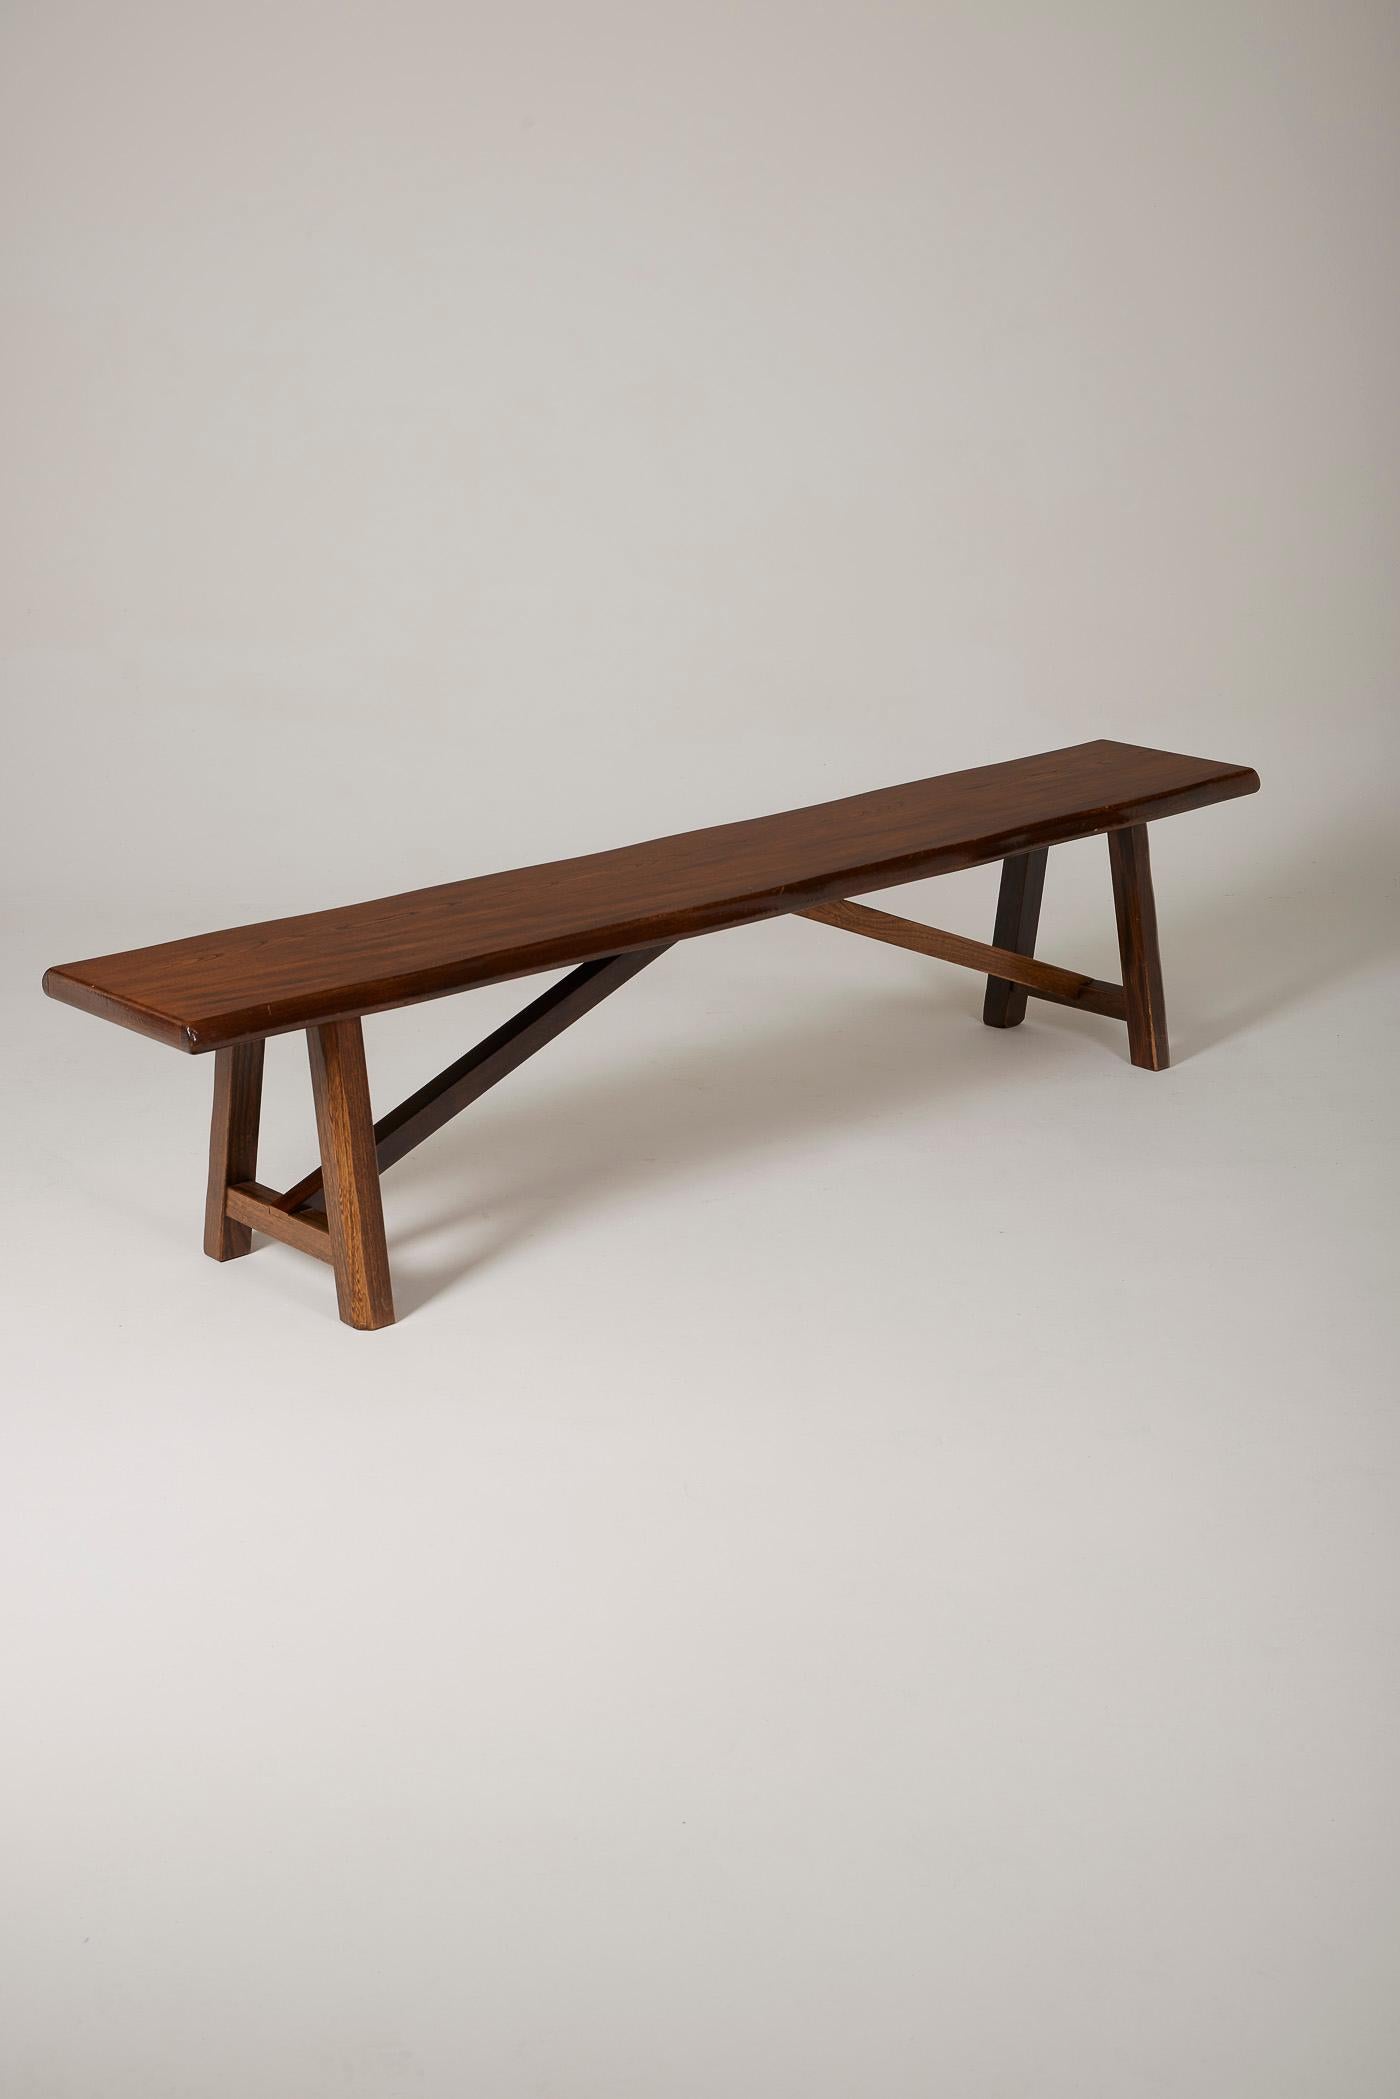 Wood Solid wood bench